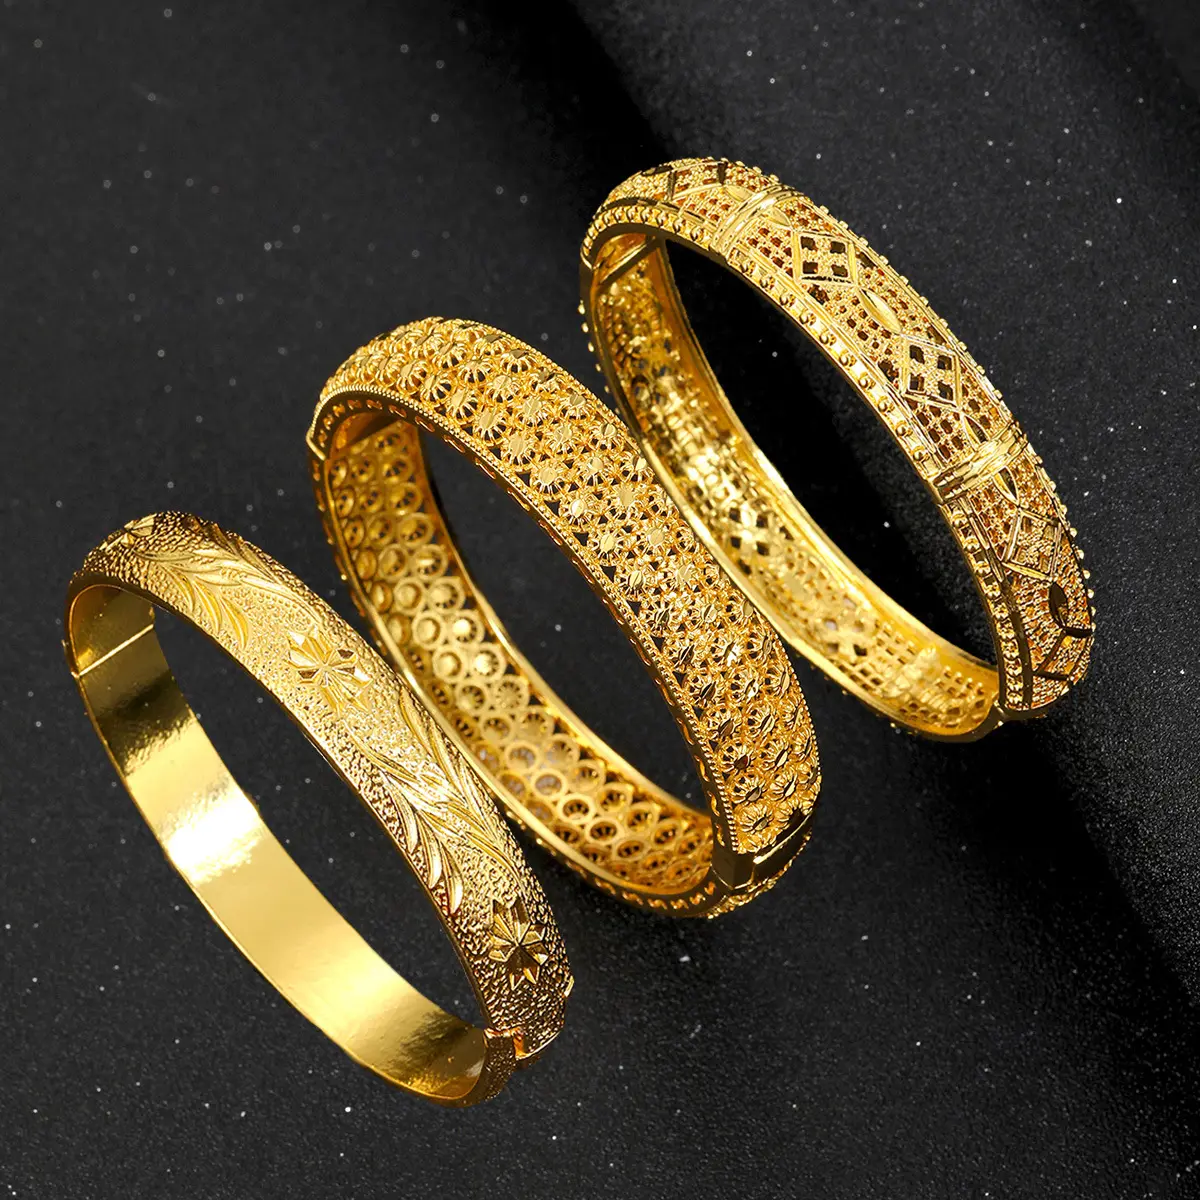 LOTOS JEWELRY 18K gold plated Retro design big cuff bangles for women jewelry vintage Gilt Carving bracelet